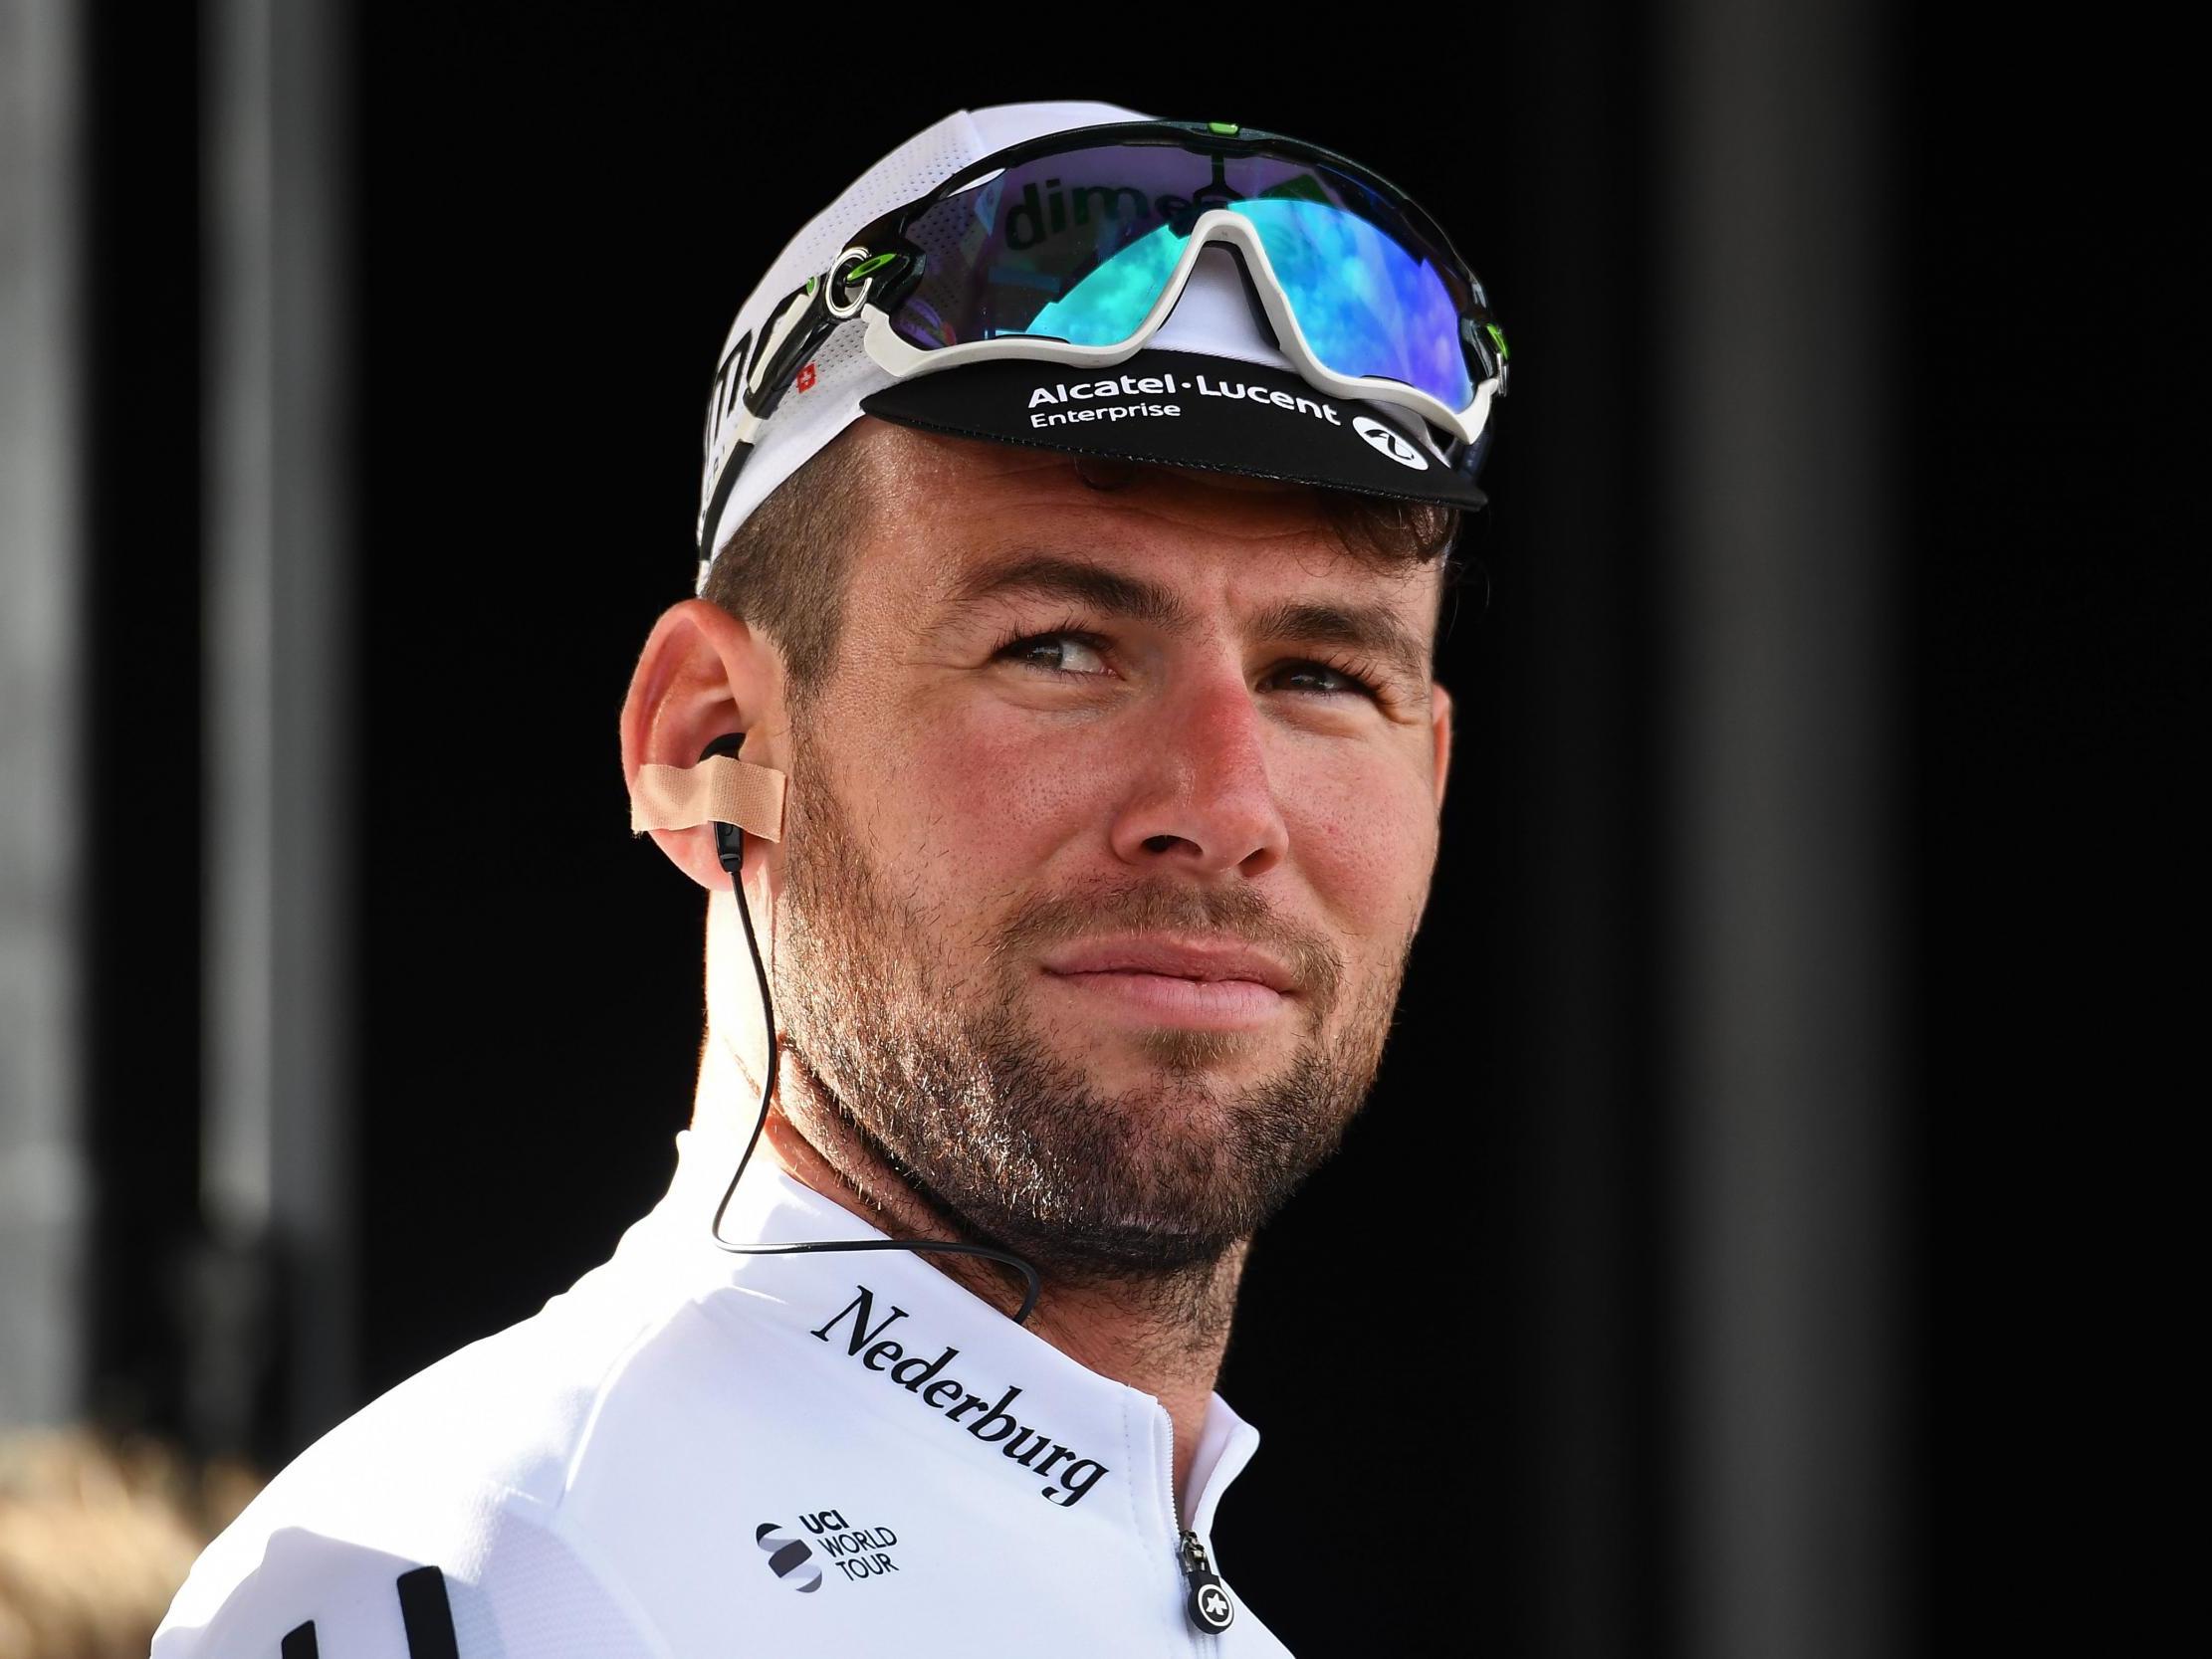 Tour de France 2019: Mark Cavendish 'absolutely heartbroken' by omission from Dimension Data team